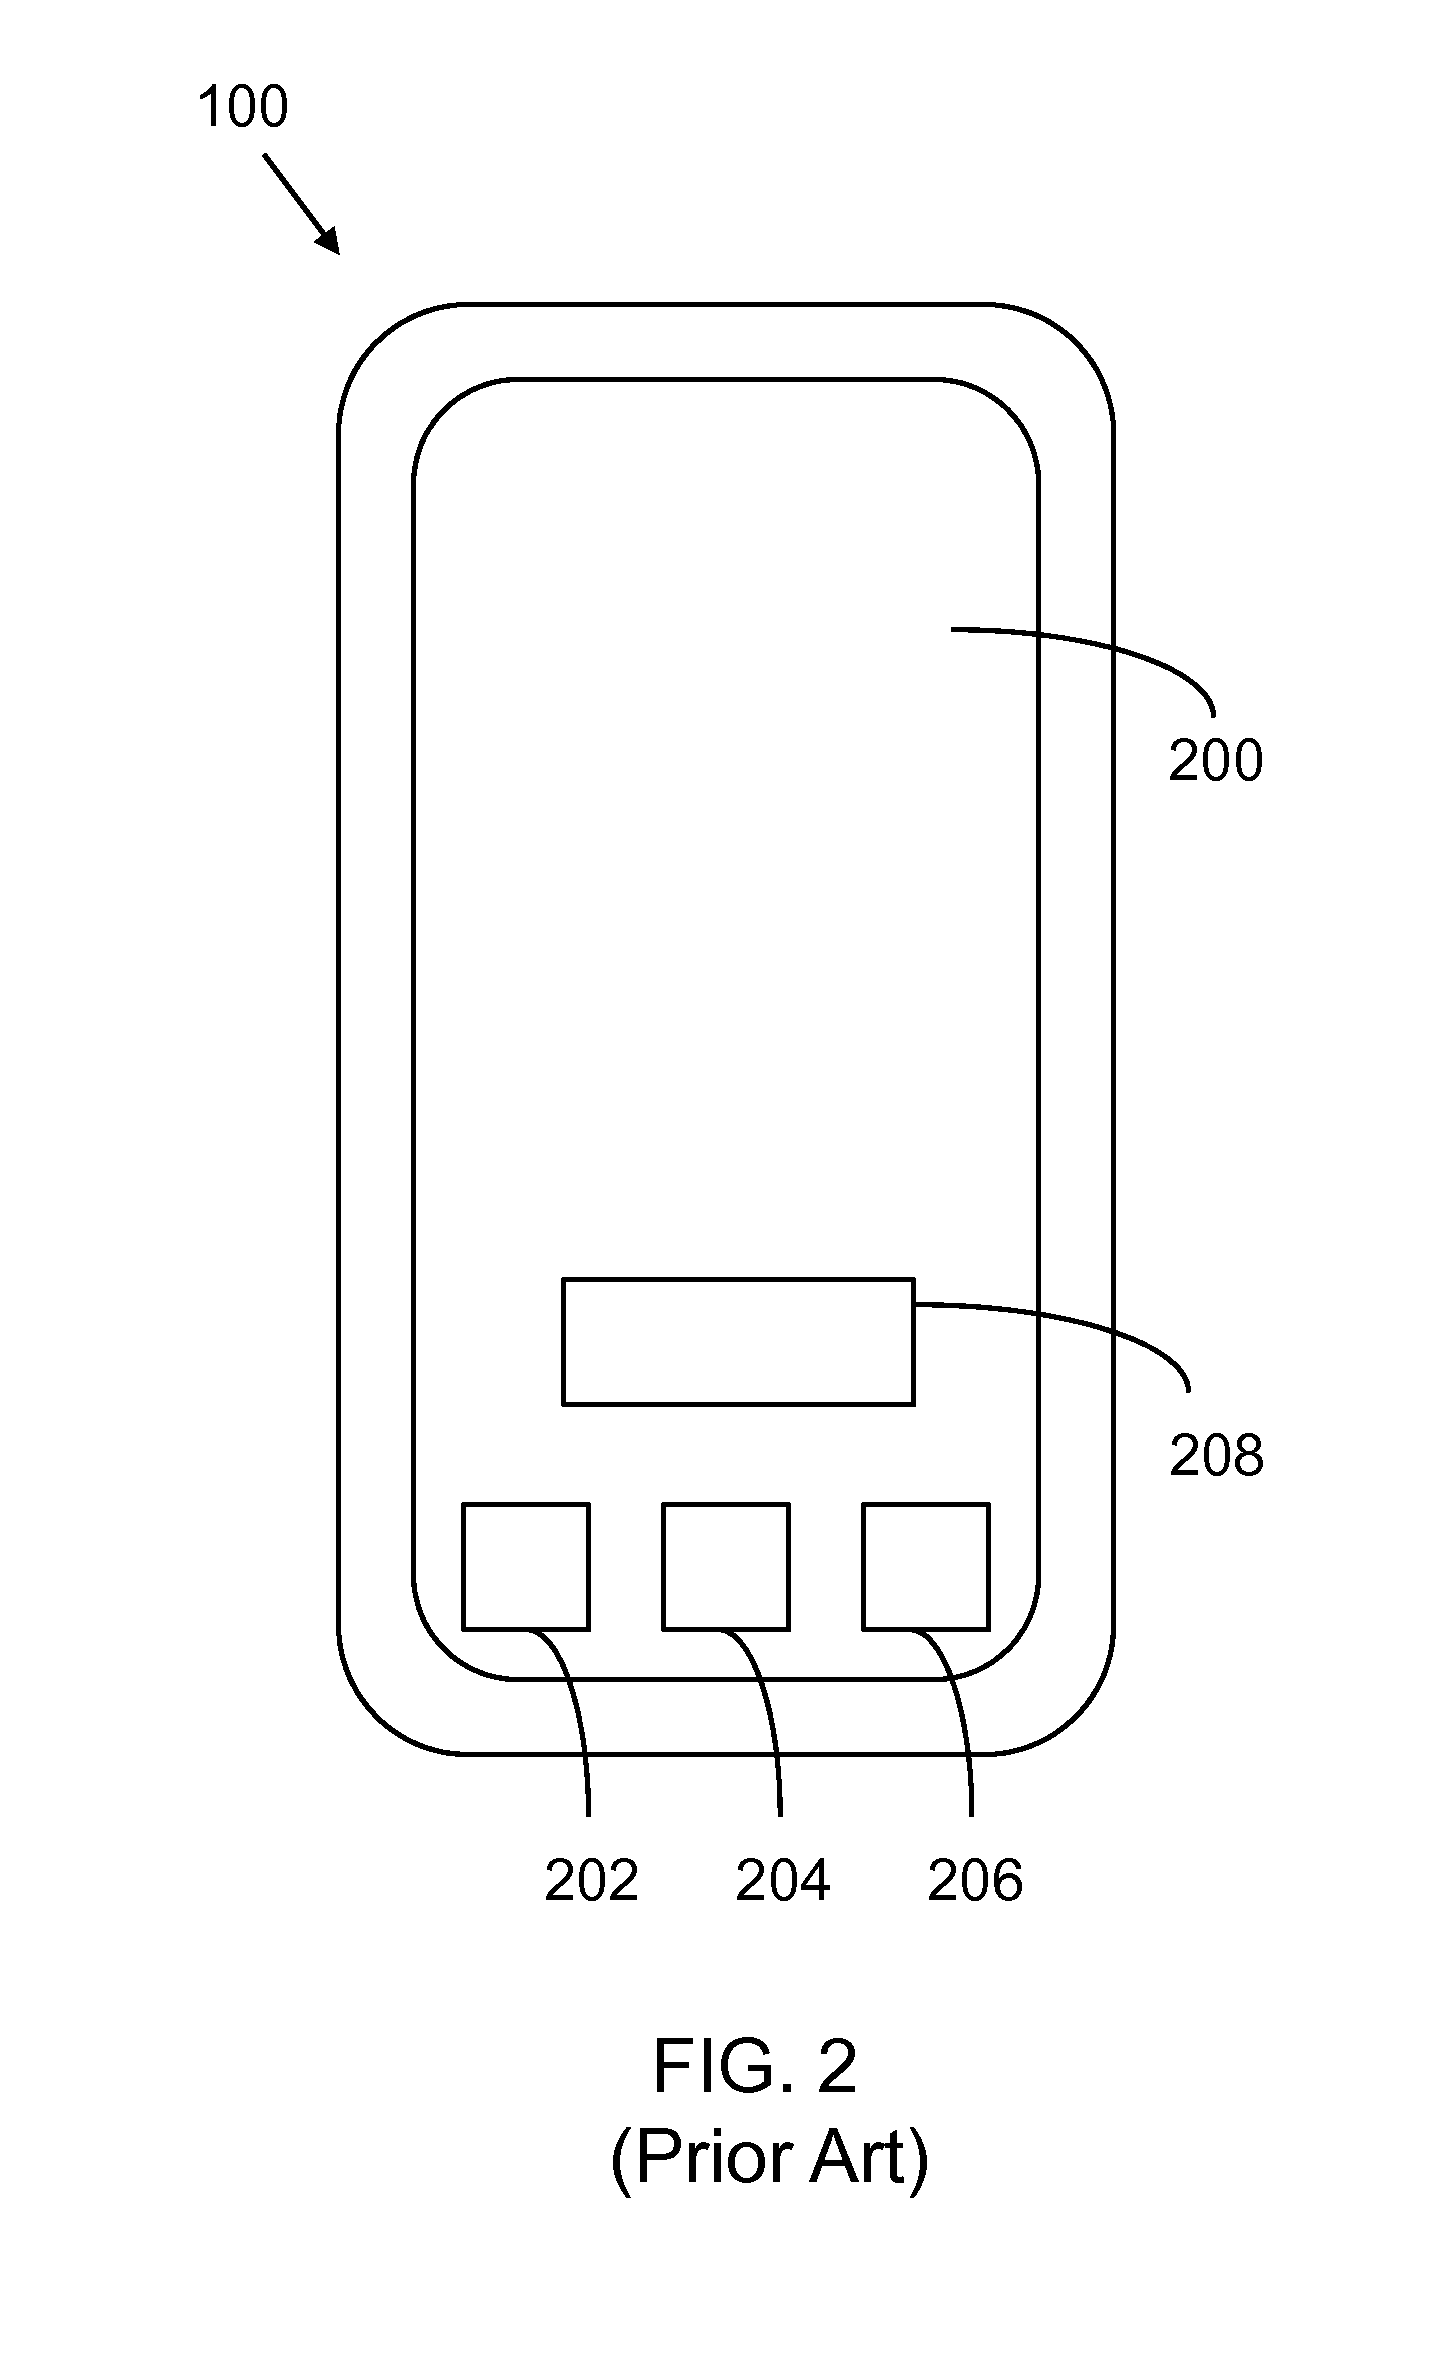 Apparatus and Method for Data Security on Mobile Devices